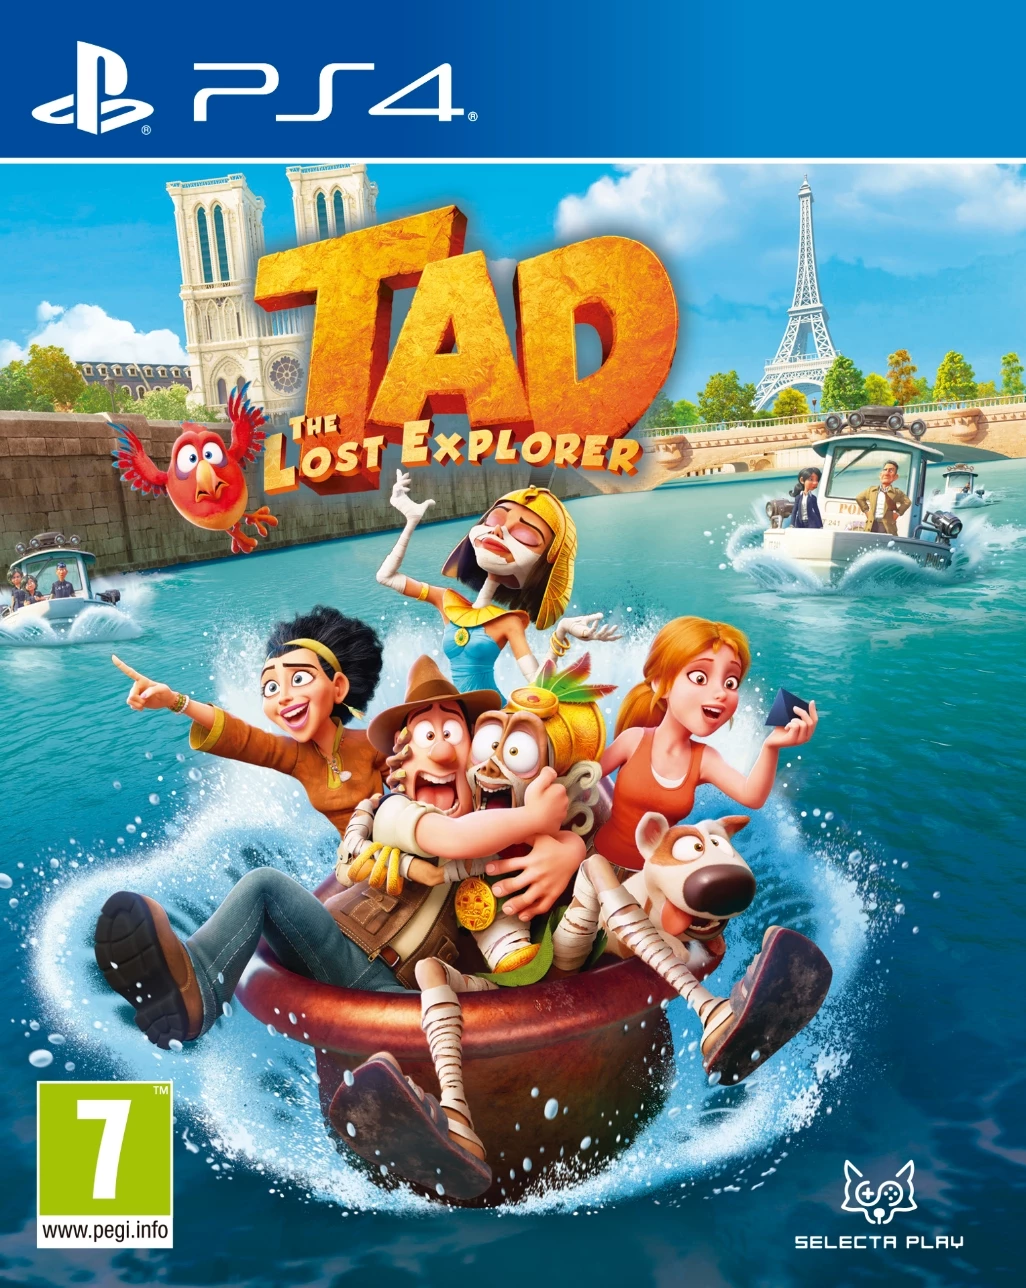 Tad the Lost Explorer (PS4), Selecta Play